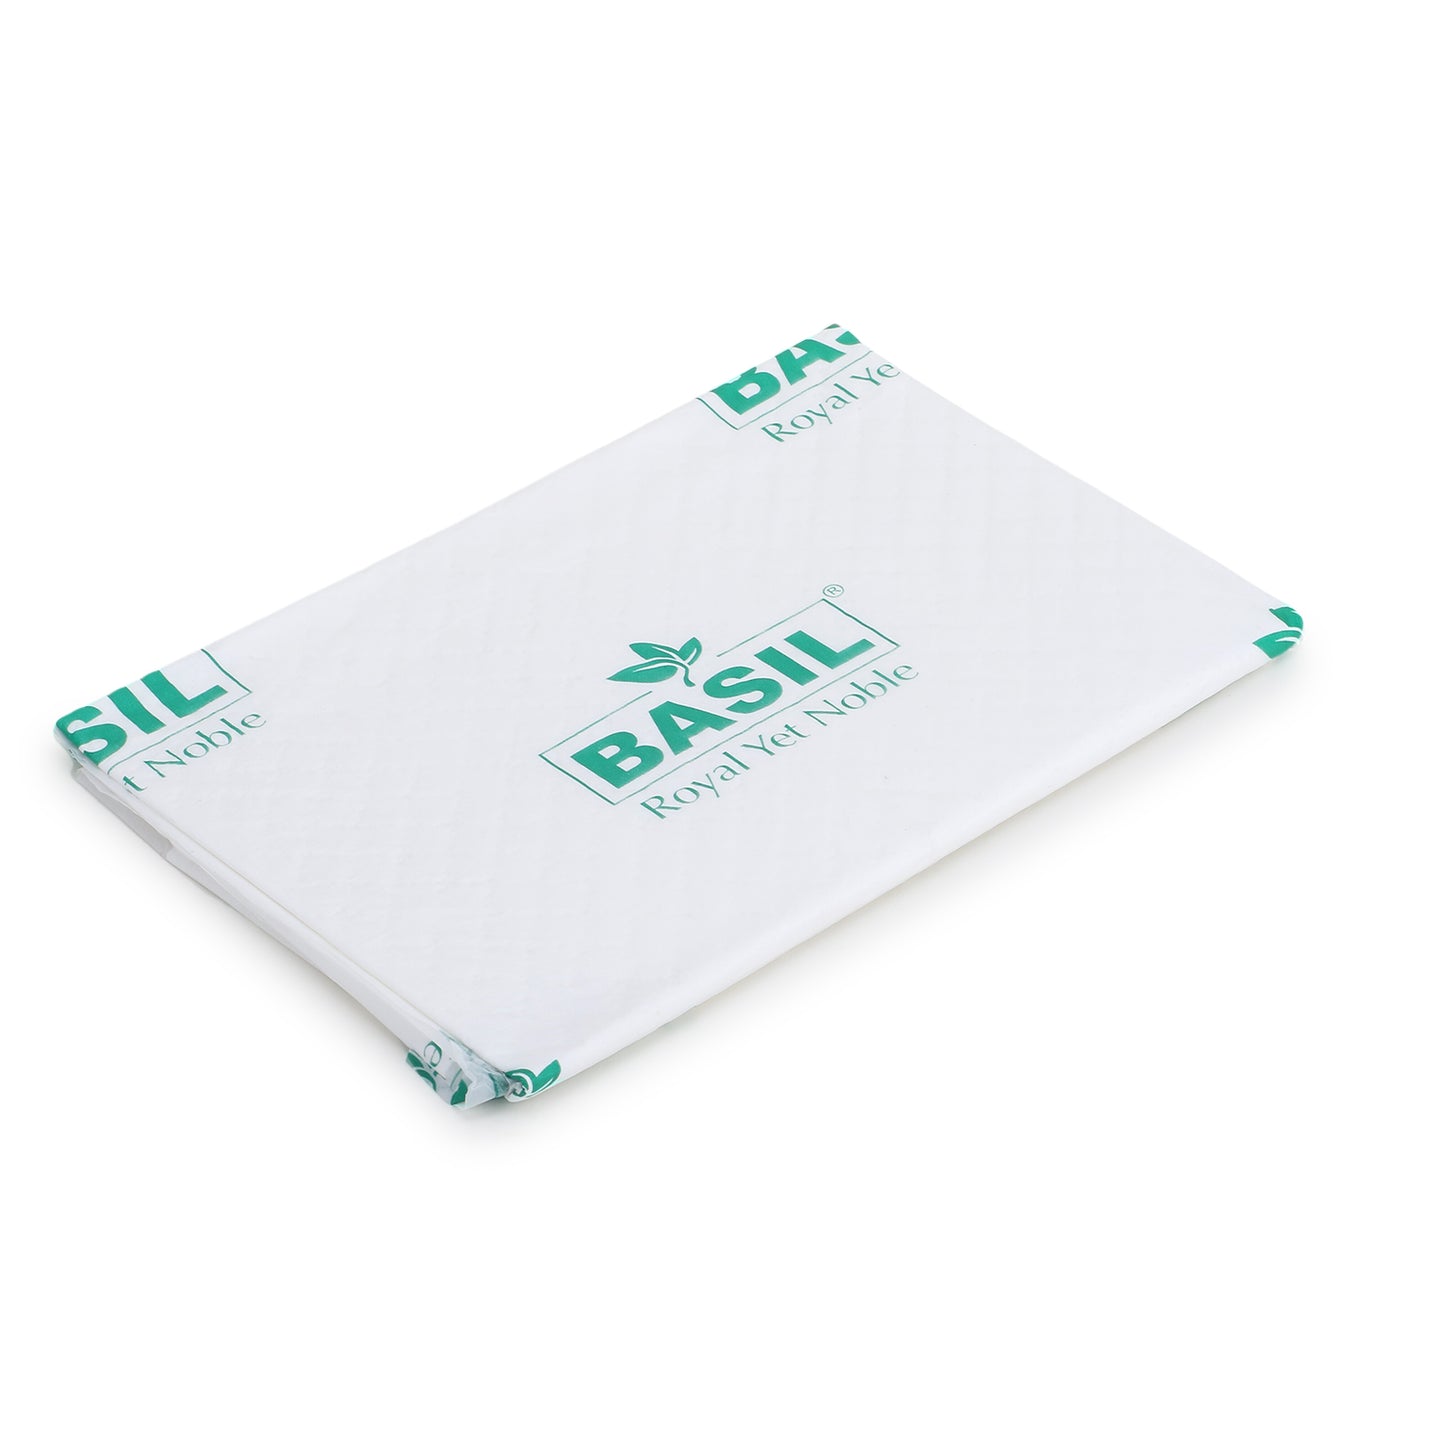 BASIL Puppy Training Pee Pads for Pets (Size - 45X60cm)